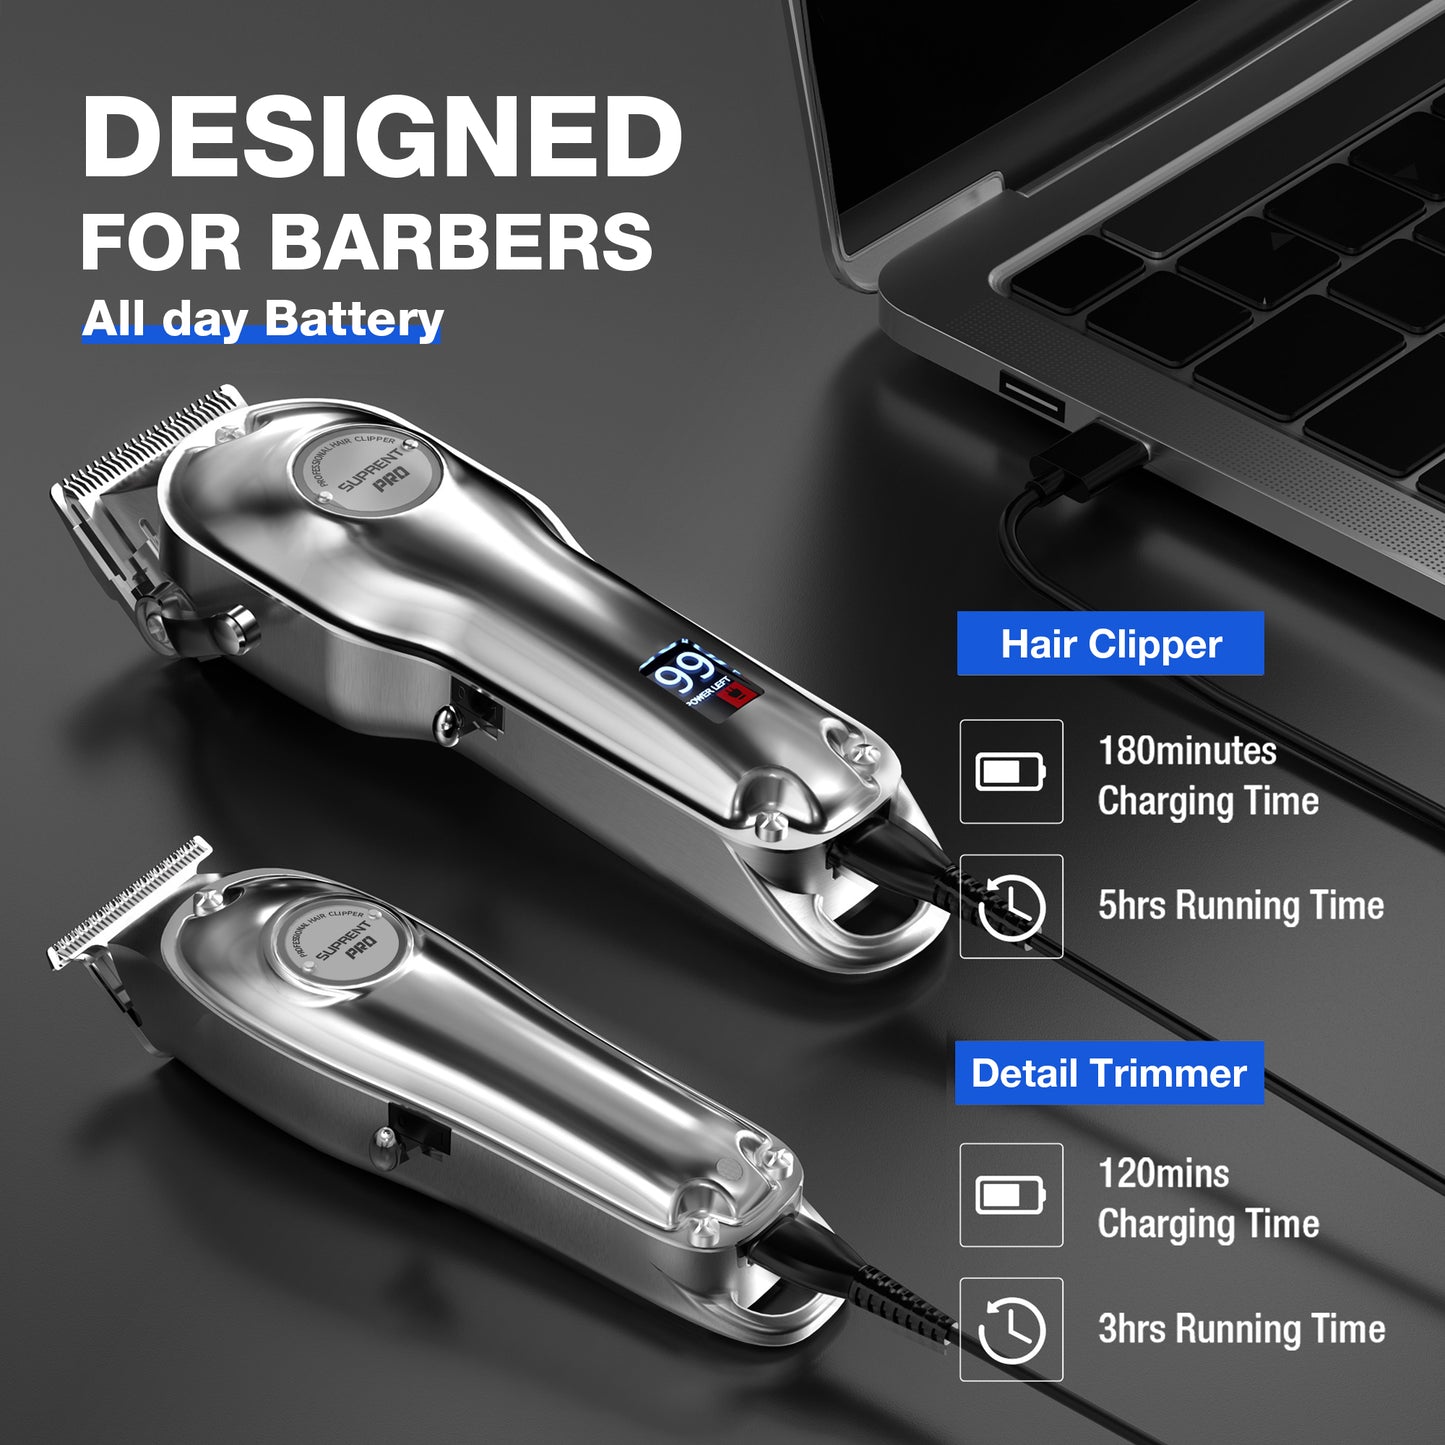 SUPRENT THE SILVER KNIGHT Professional Hair Clipper Kit HC596SX